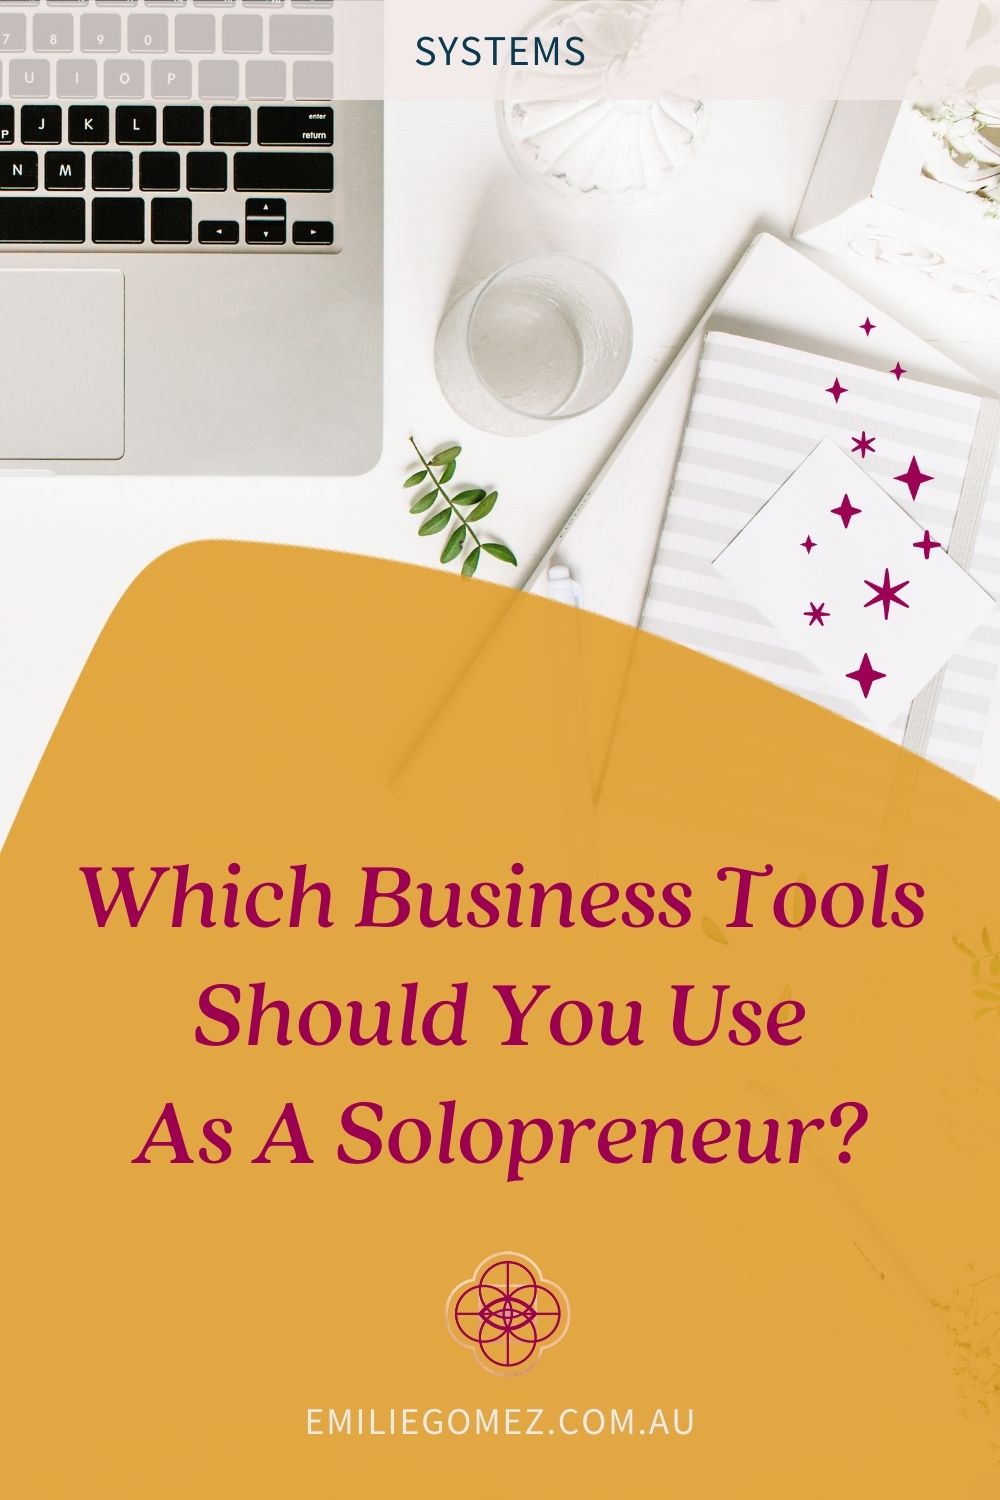 There are so many business tools out there that you can use as an solopreneur running an online business. It’s great that there’s a platform or app for just about everything business operation you have but it can be overwhelming trying to find the right tool for your business. How do you choose? I’ve got you covered with this 3-part blog post series that walks you through what to consider so that you can get the perfect business tool for you!